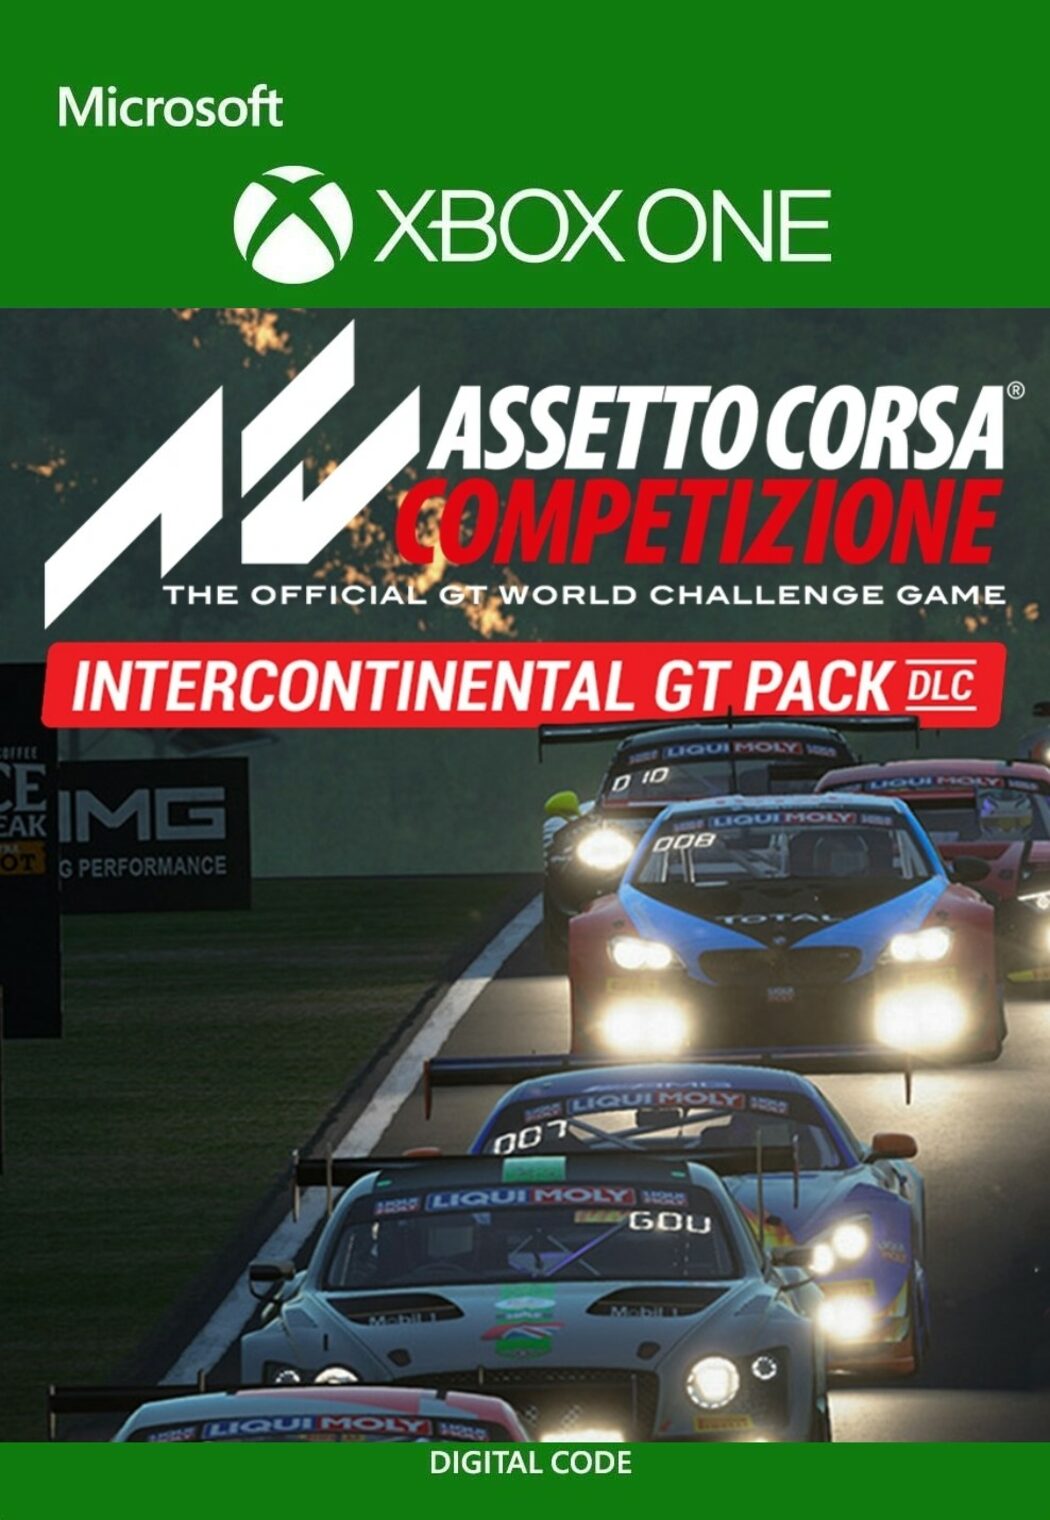 The Assetto Corsa Competizione Intercontinental GT Pack DLC is now  available